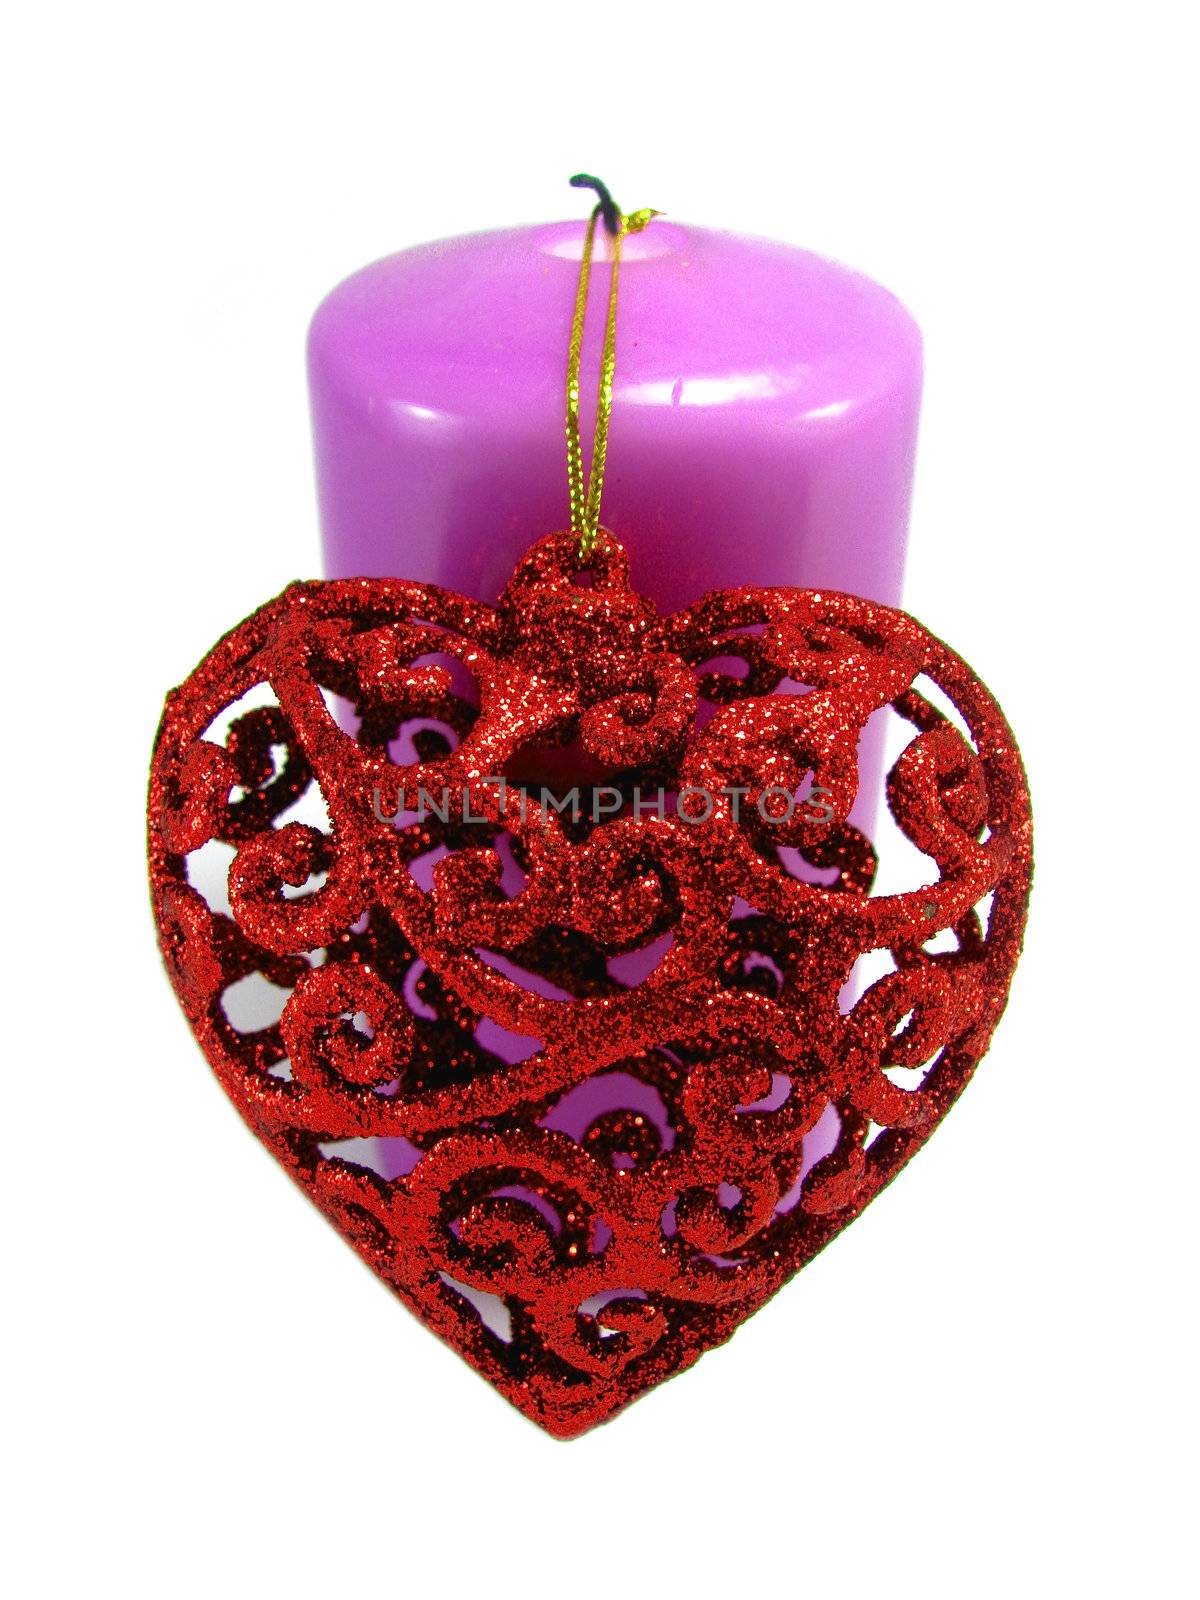 Candle and openwork heart by Irina1977